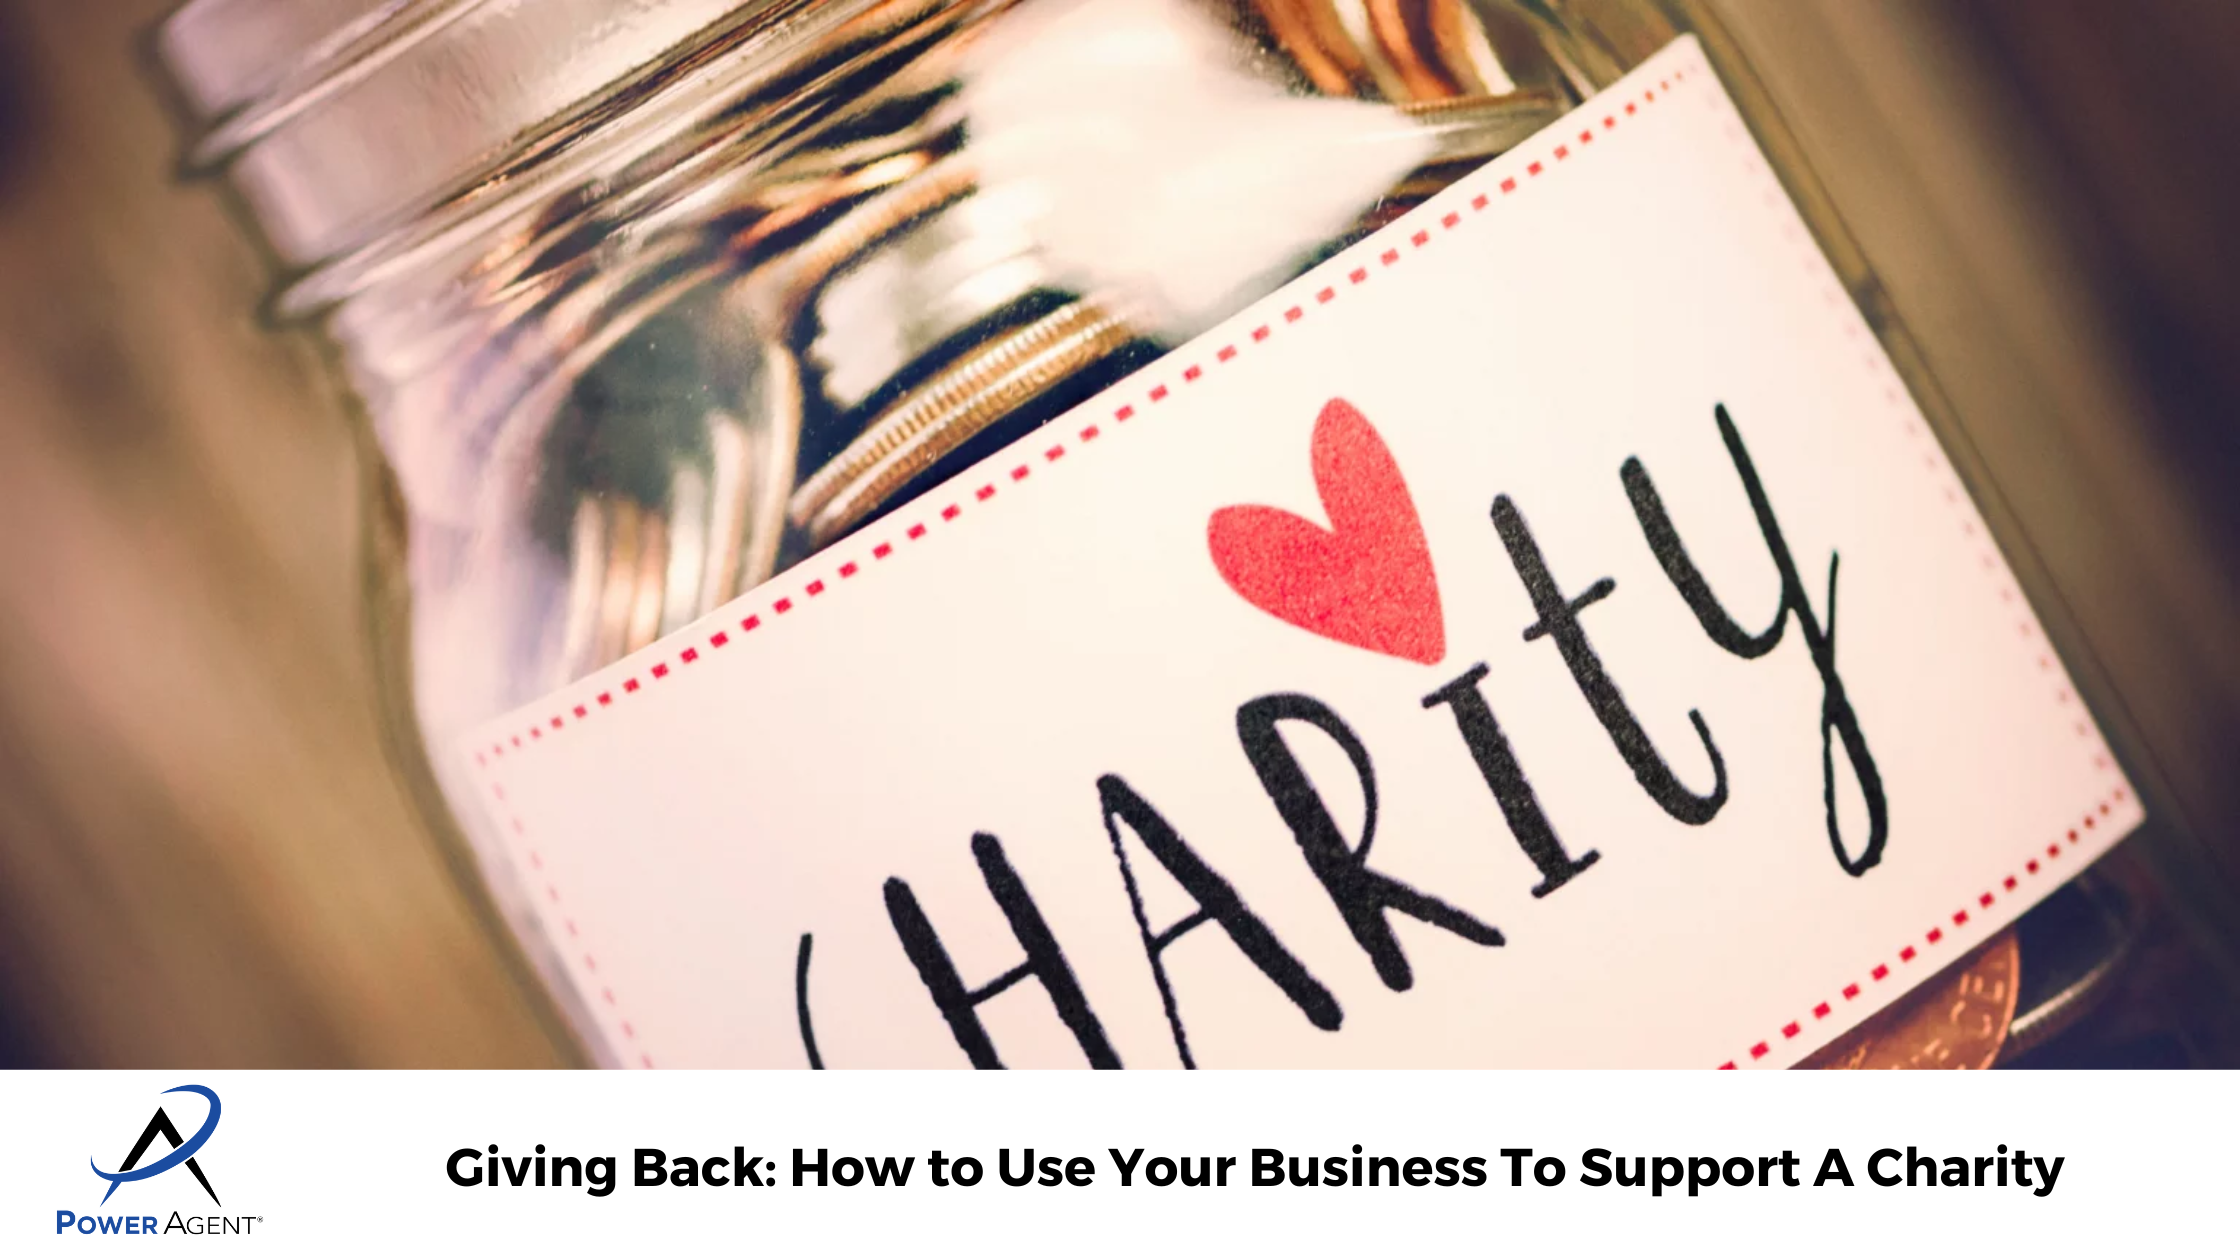 Giving Back: How to Use Your Business To Support A Charity